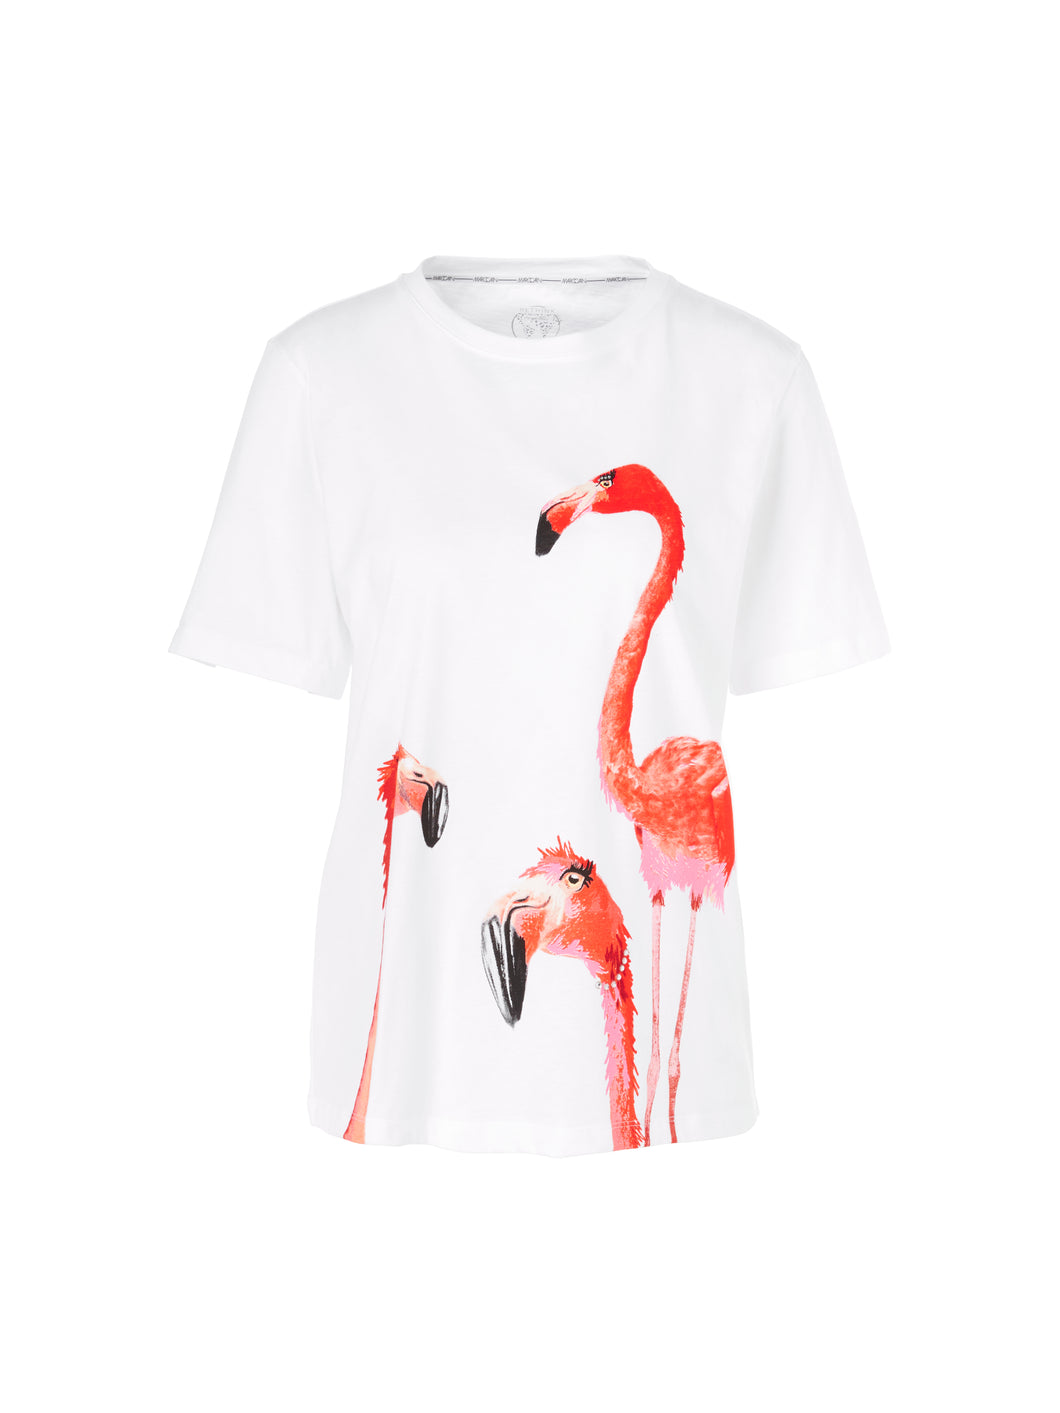 Marccain T-Shirt mit Print „Rethink Together”